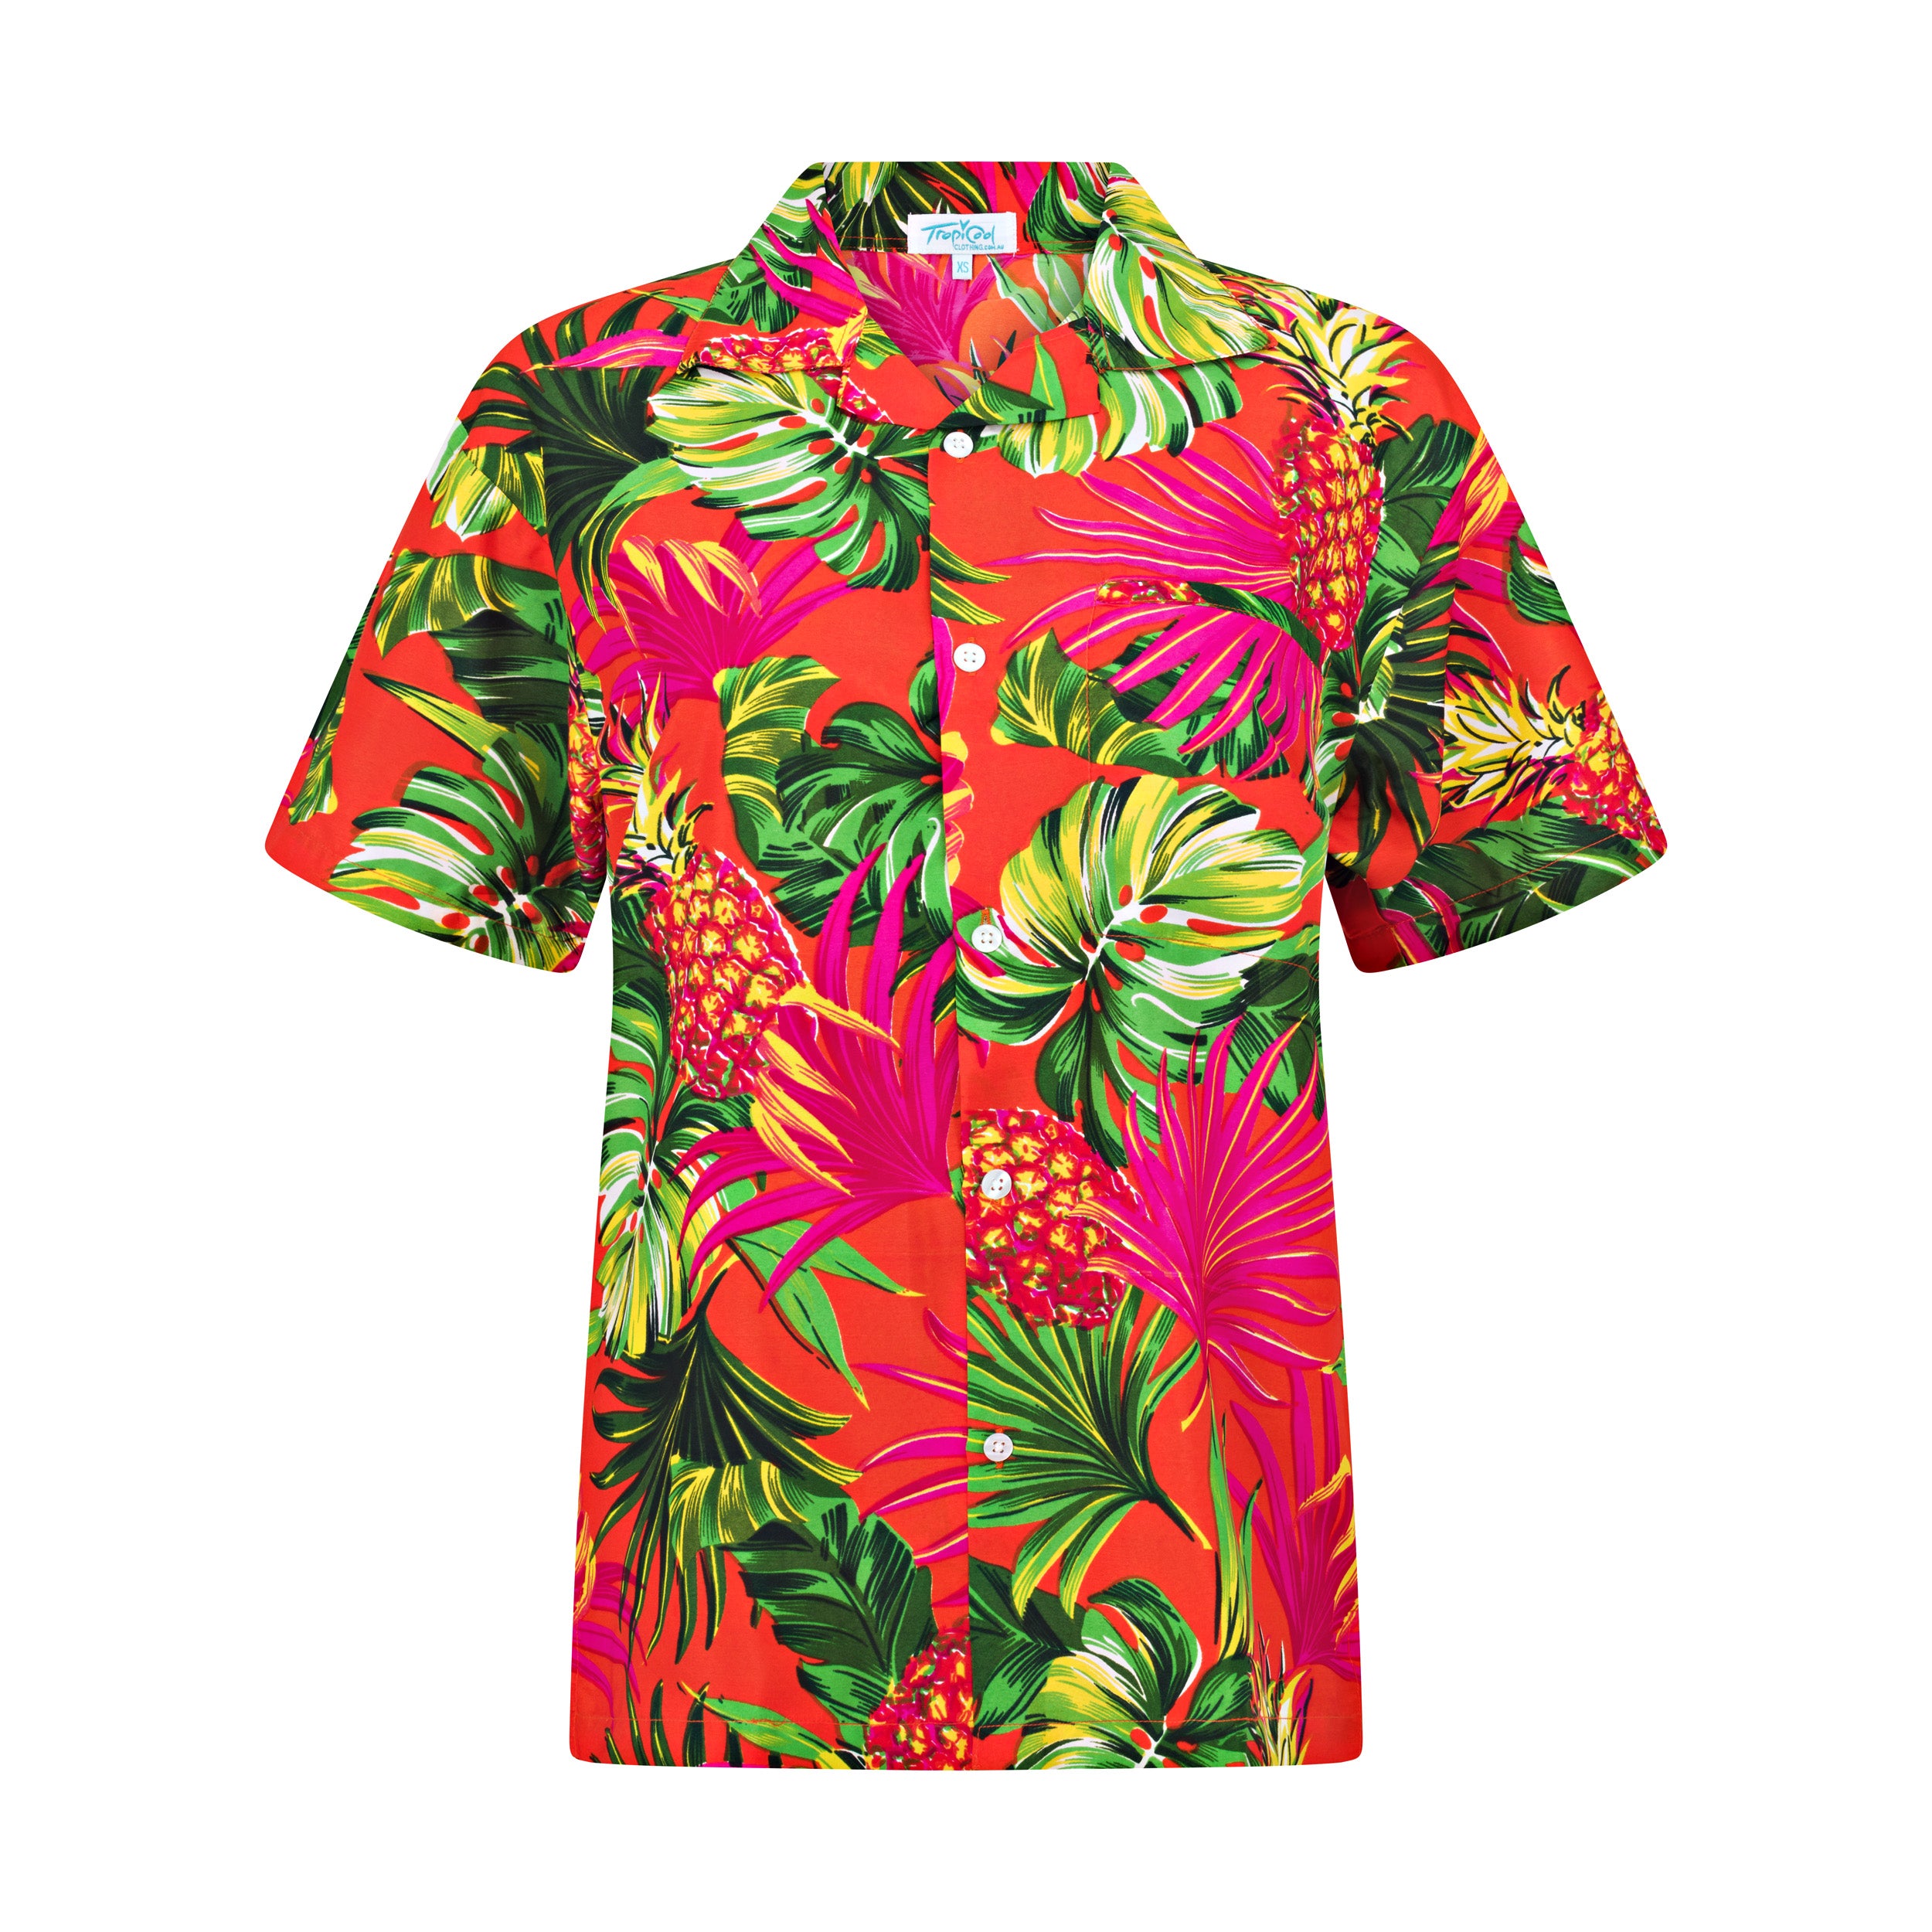 Pineapple Jungle Red Adult Shirt